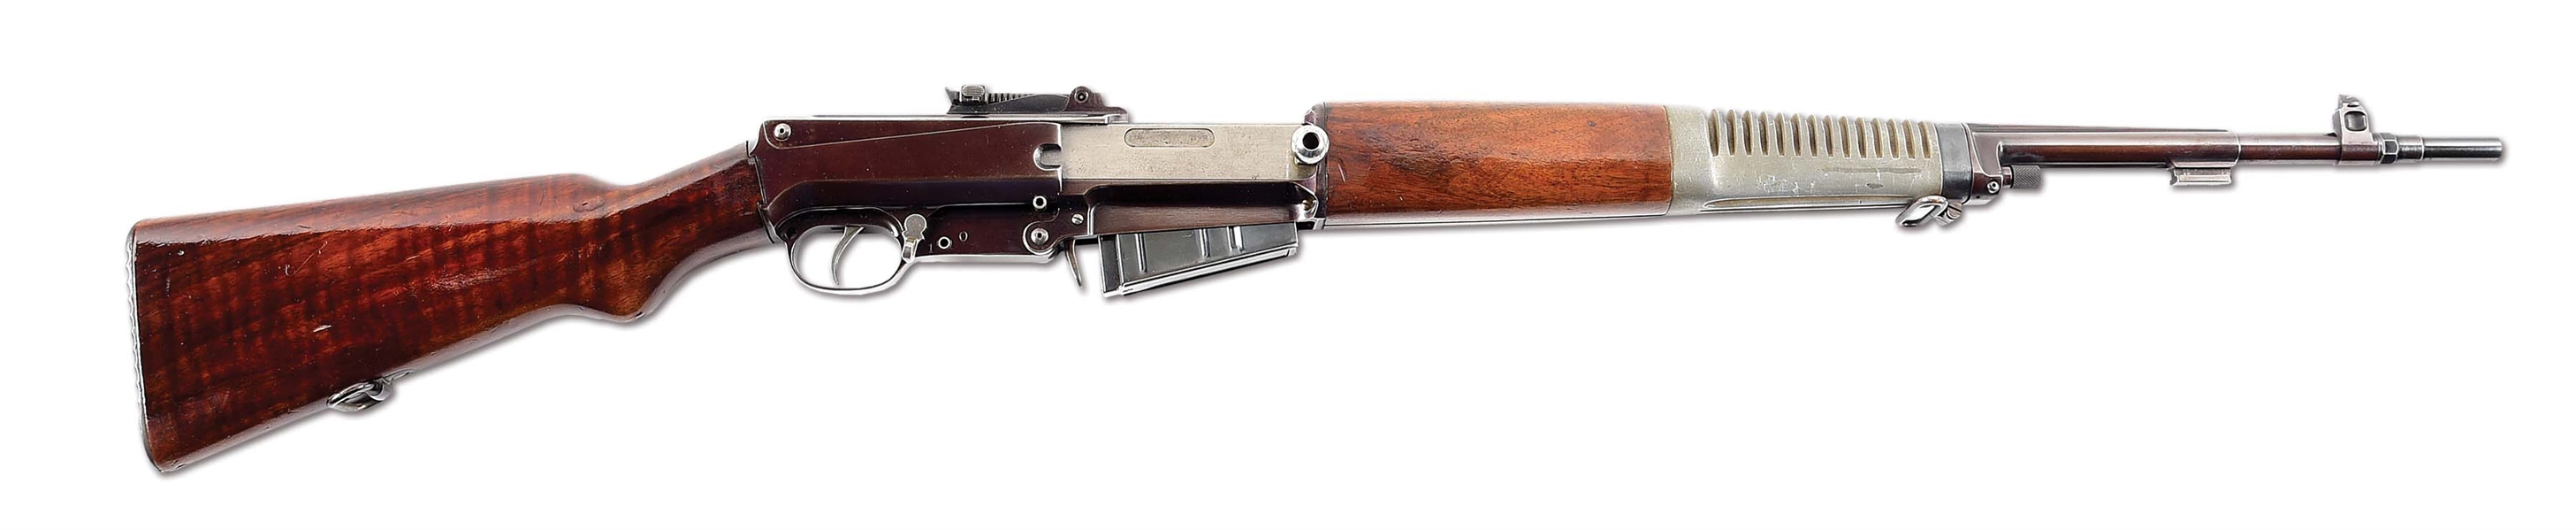 (C) EXCEPTIONALLY SCARCE & SOUGHT AFTER CZECHOSLOVAKIAN MODEL ZH-29 SEMI-AUTOMATIC RIFLE.